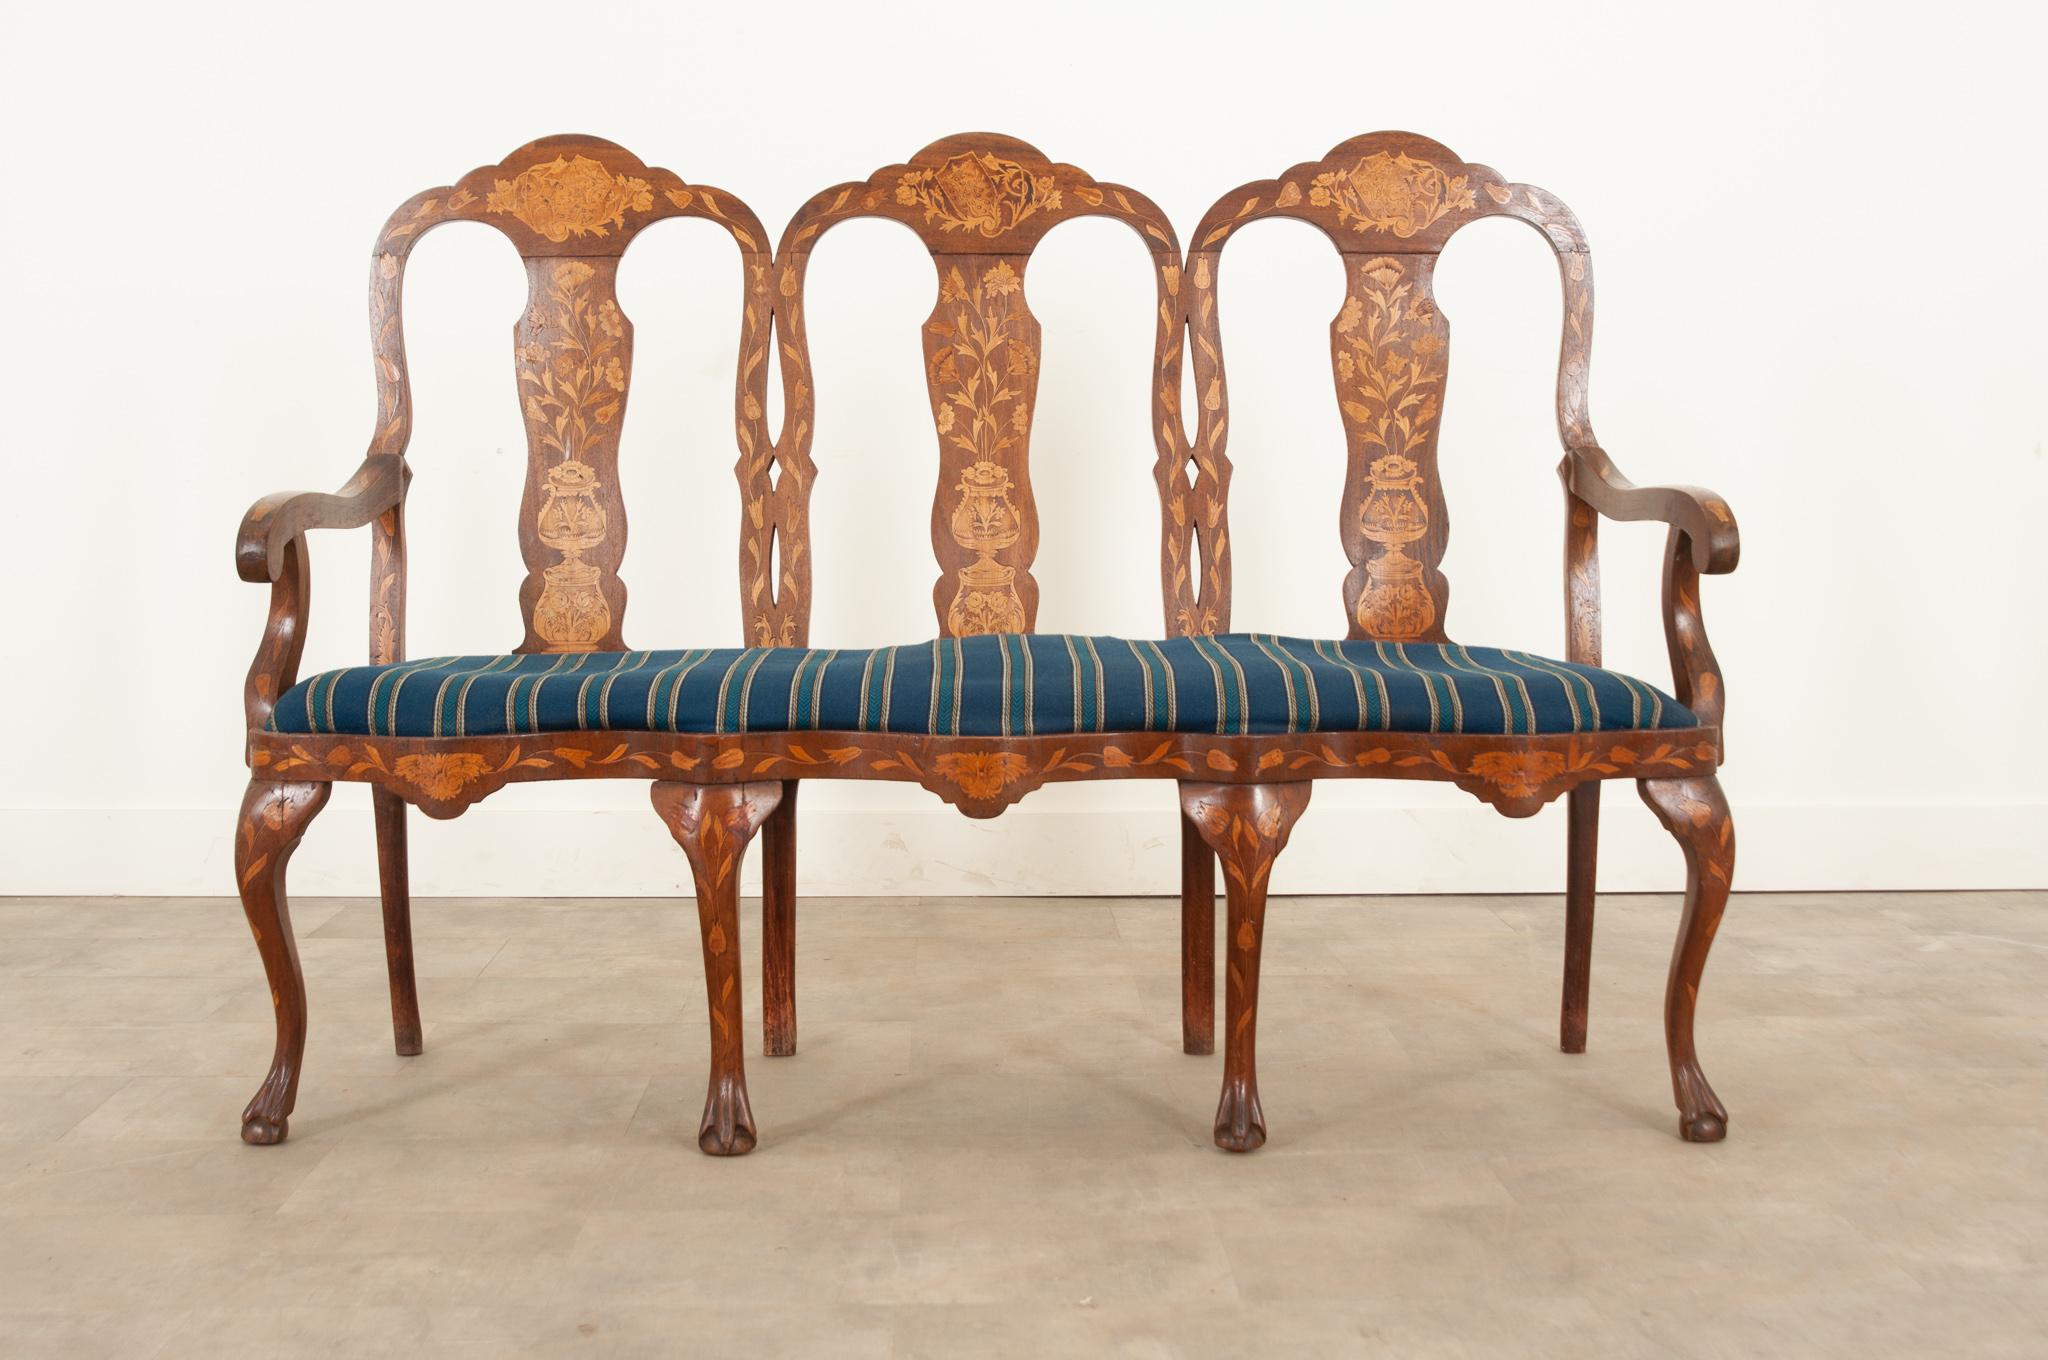 This Dutch Rococo style three-seat-back settee is a wonderful addition to any interior. Crafted during the 19th century with high quality, ornate marquetry work. The top of each seat back showcases a crowned lion in the standing “rampant” position.